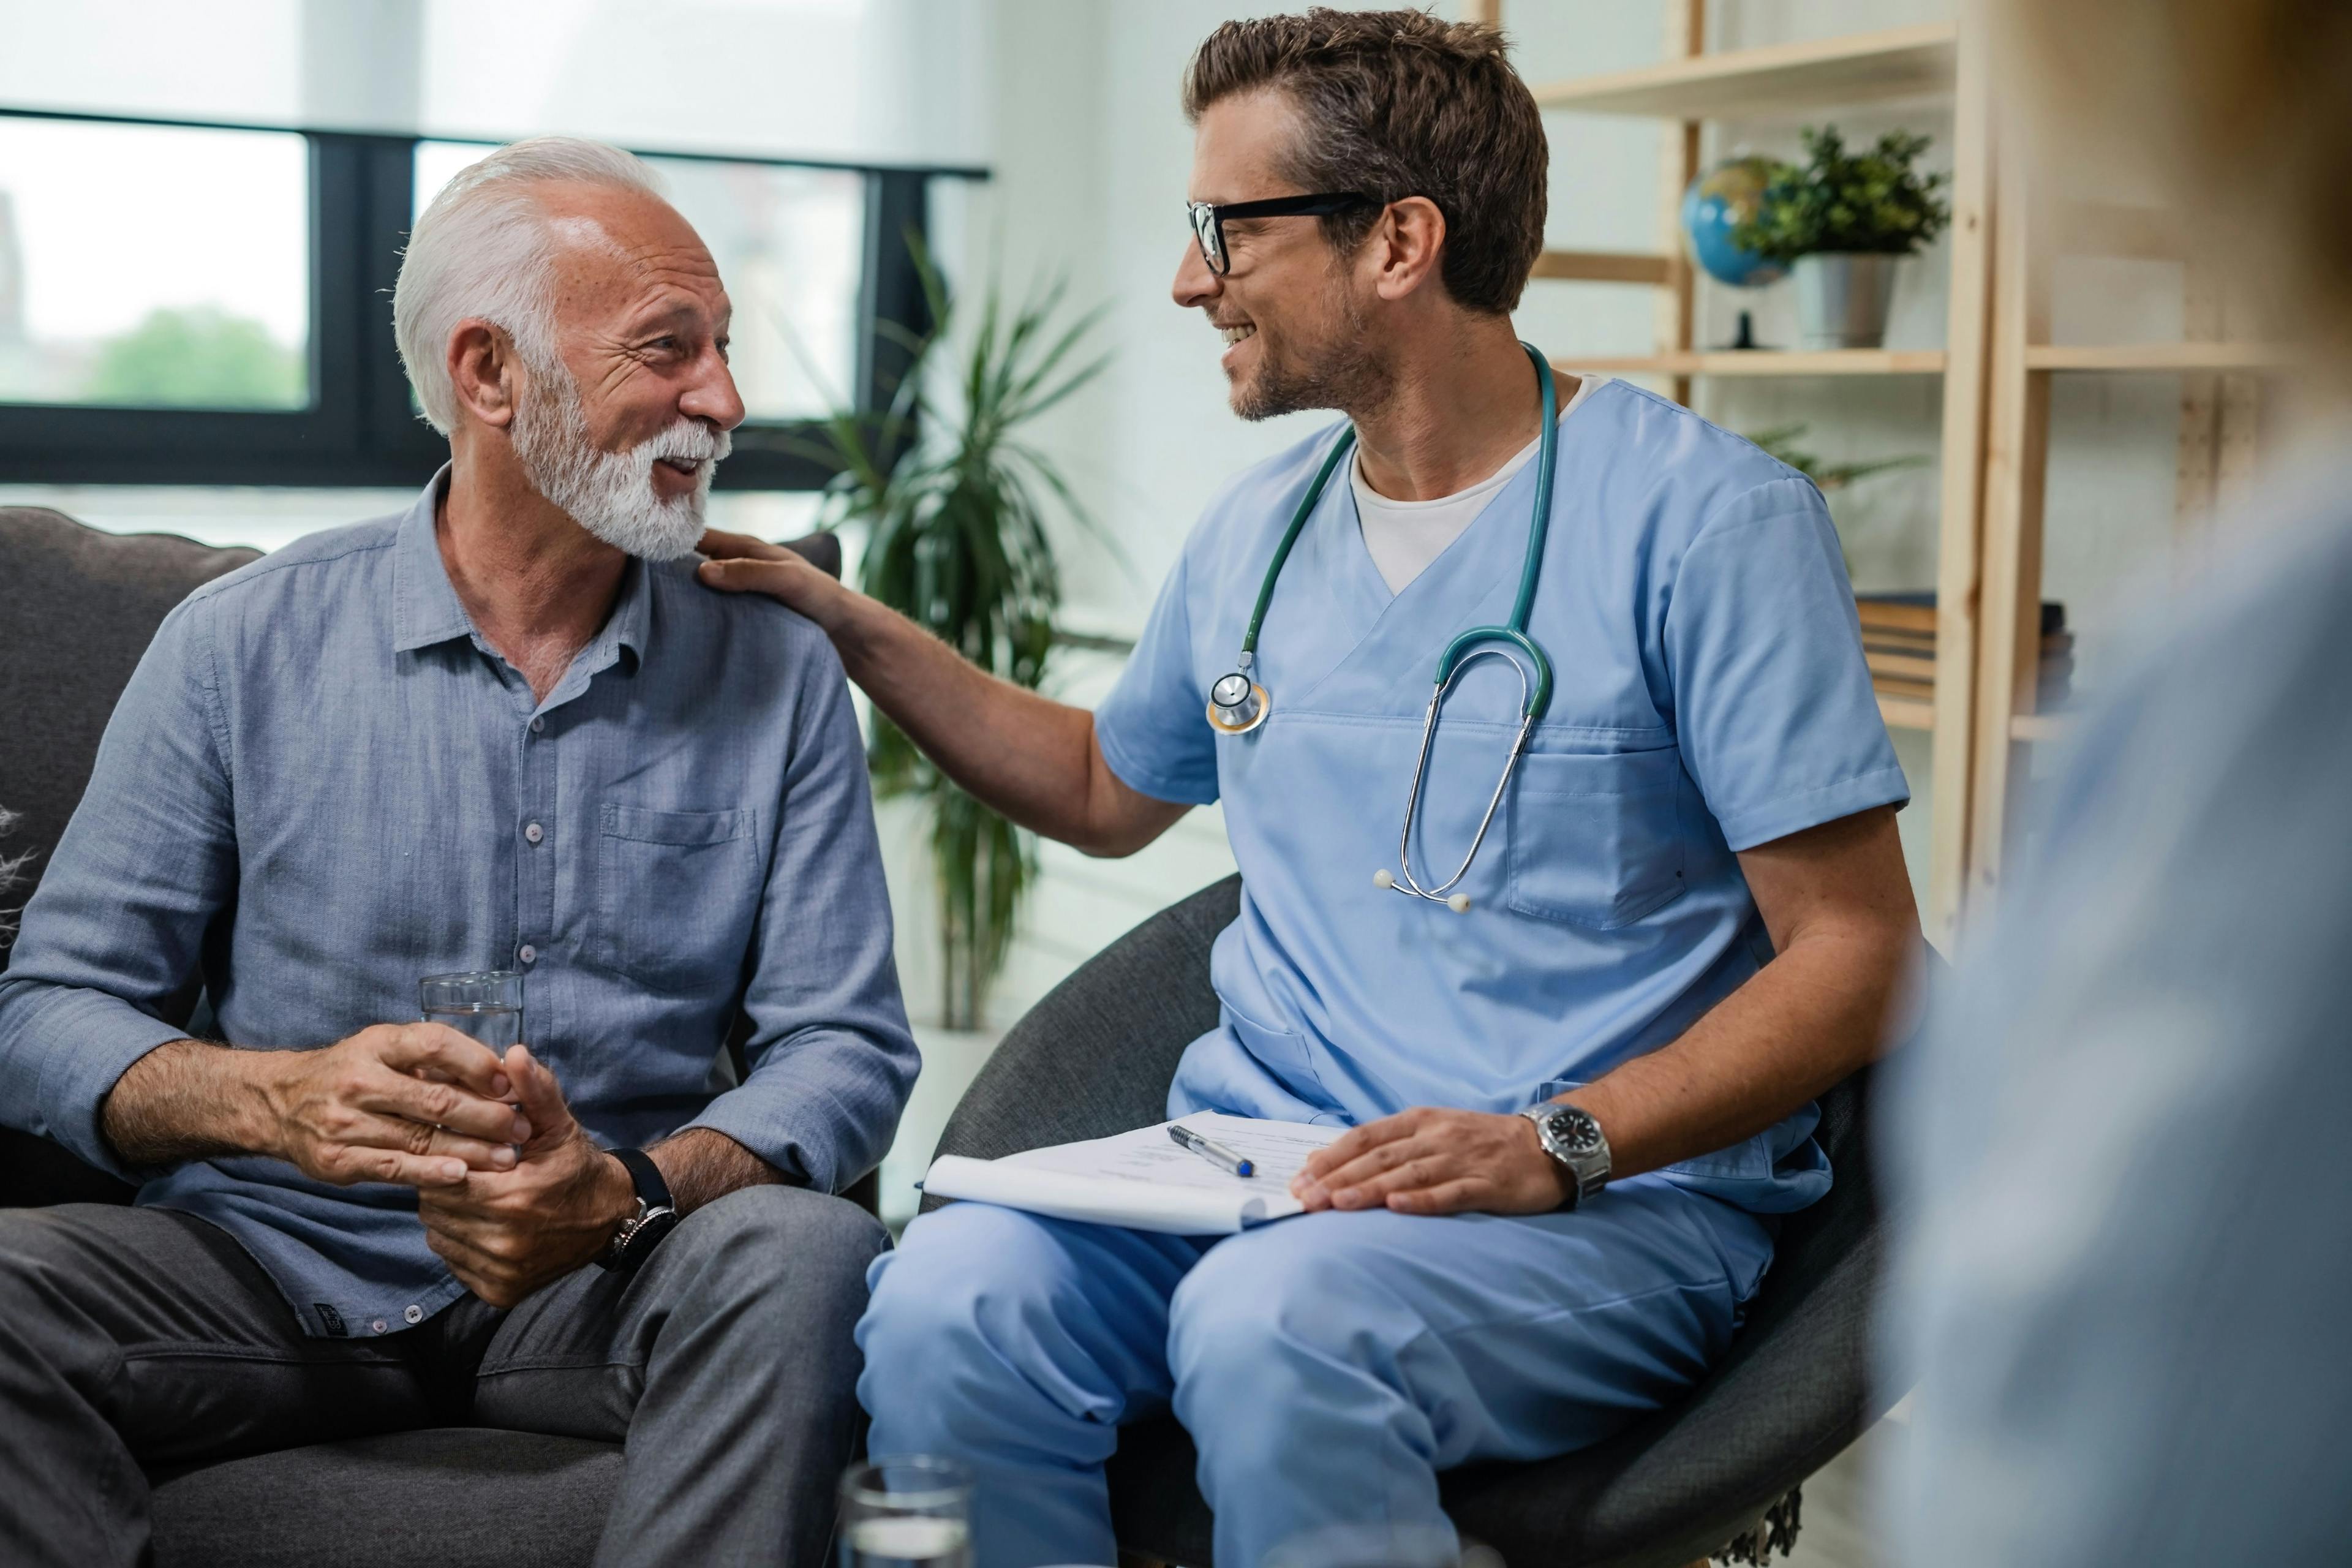 doctor talking with patient | Image credit: Drazen - stock.adobe.com